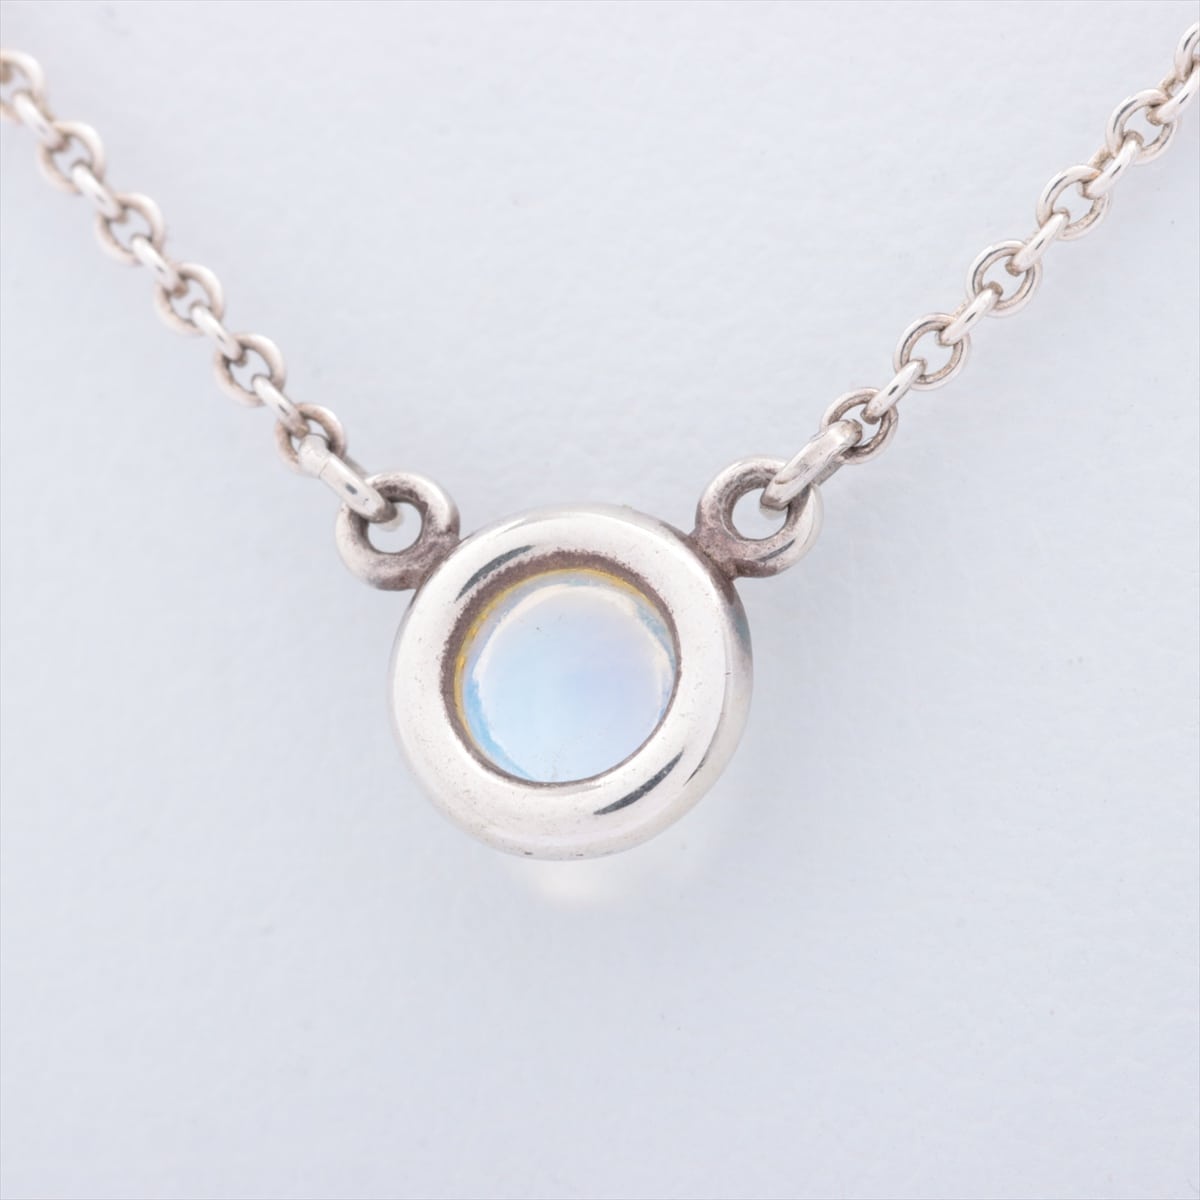 Tiffany Kolor By the Yard Necklace 925 1.8g Silver Moonstone